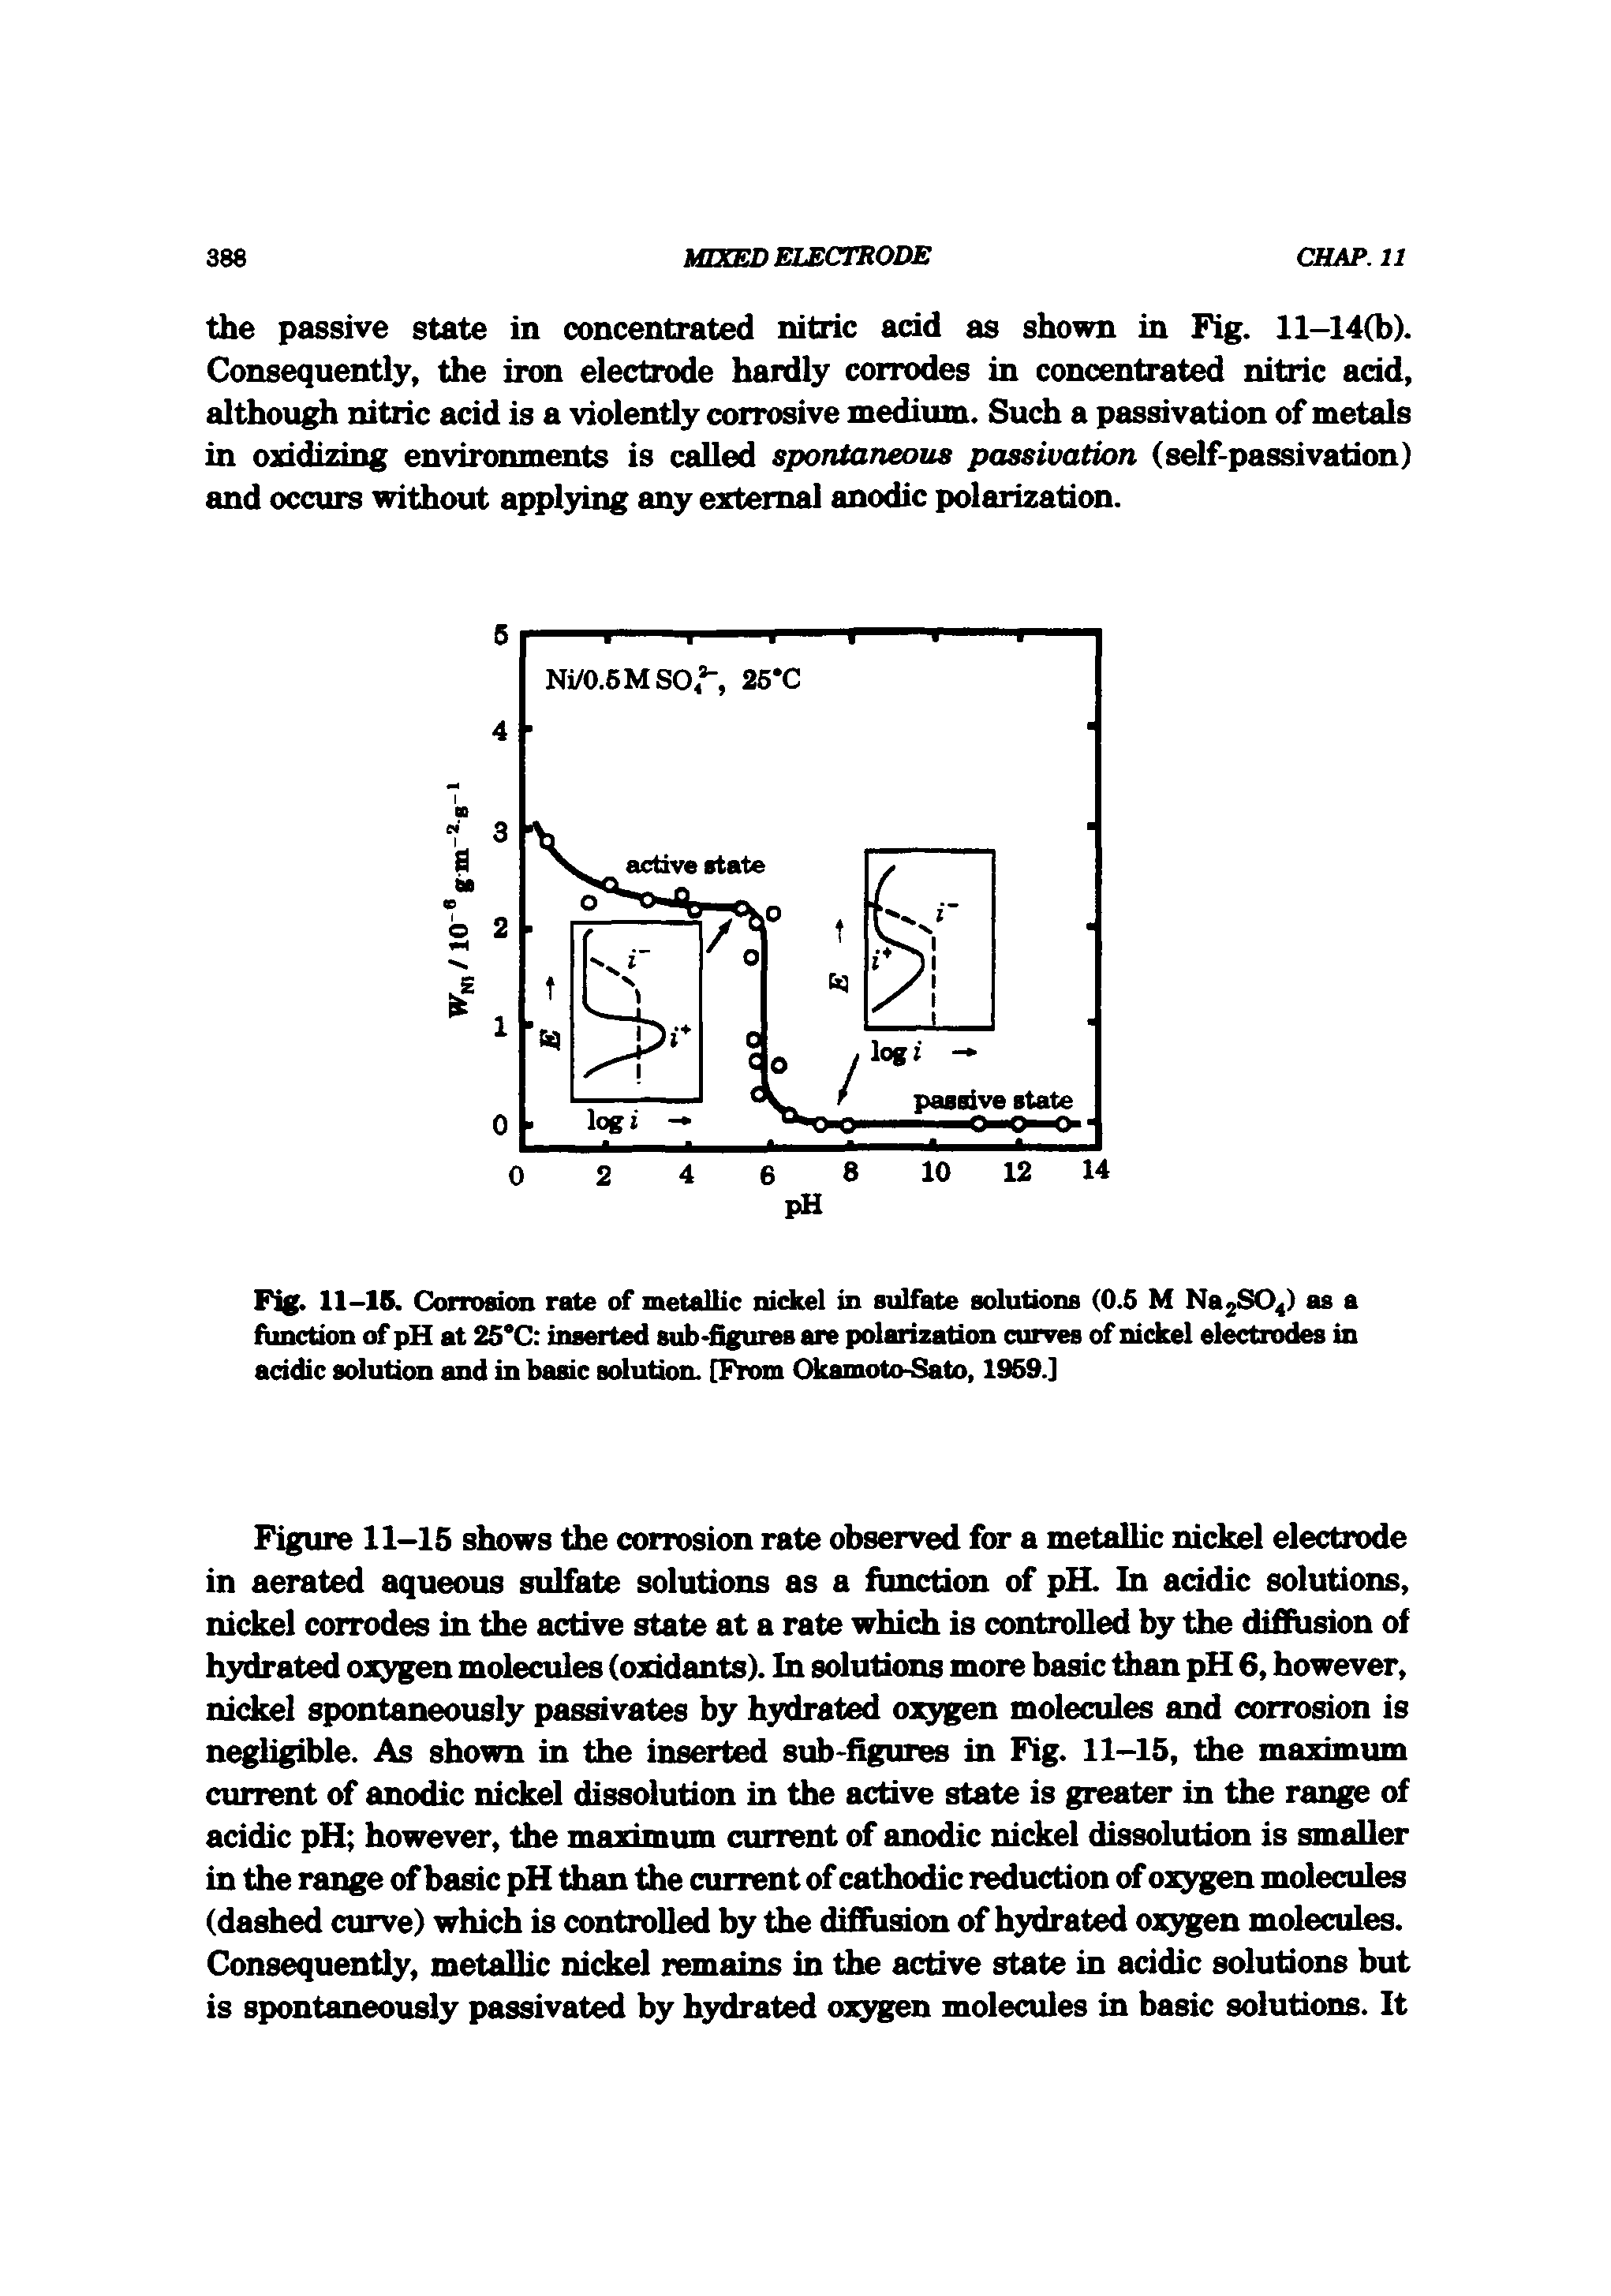 Fig. 11-16. Corrosion rate of metallic nickel in sulfate solutions (0.5 M NsjSO ) as a function of pH at 25 C inserted sub-figures are polarization curves of nickel electrodes in acidic solution and in basic solution. [From CScamoto-Sato, 1959.]...